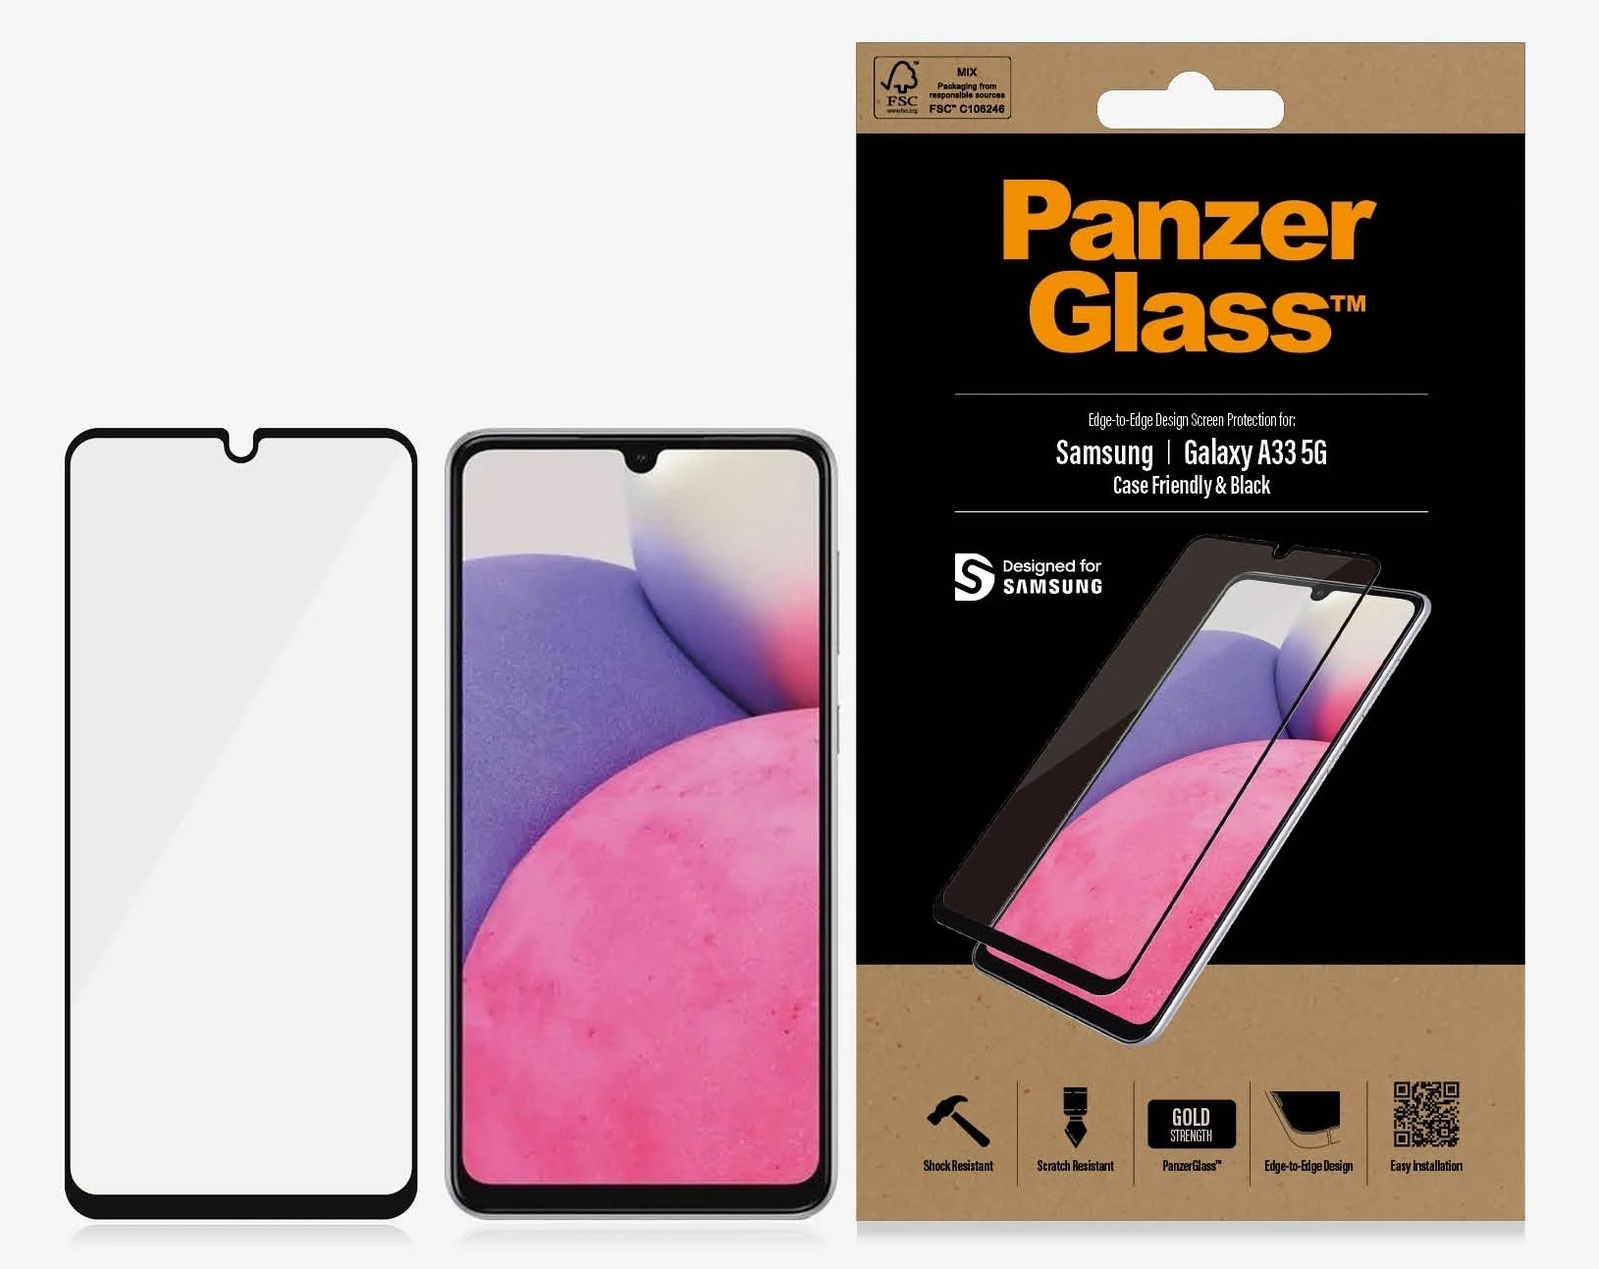 PanzerGlass Samsung Galaxy A33 5G (6.4') Screen Protector - Black (7291), Edge-to-Edge, Scratch Resistant, Shock Resistant, Case-Friendly, 100% Touch